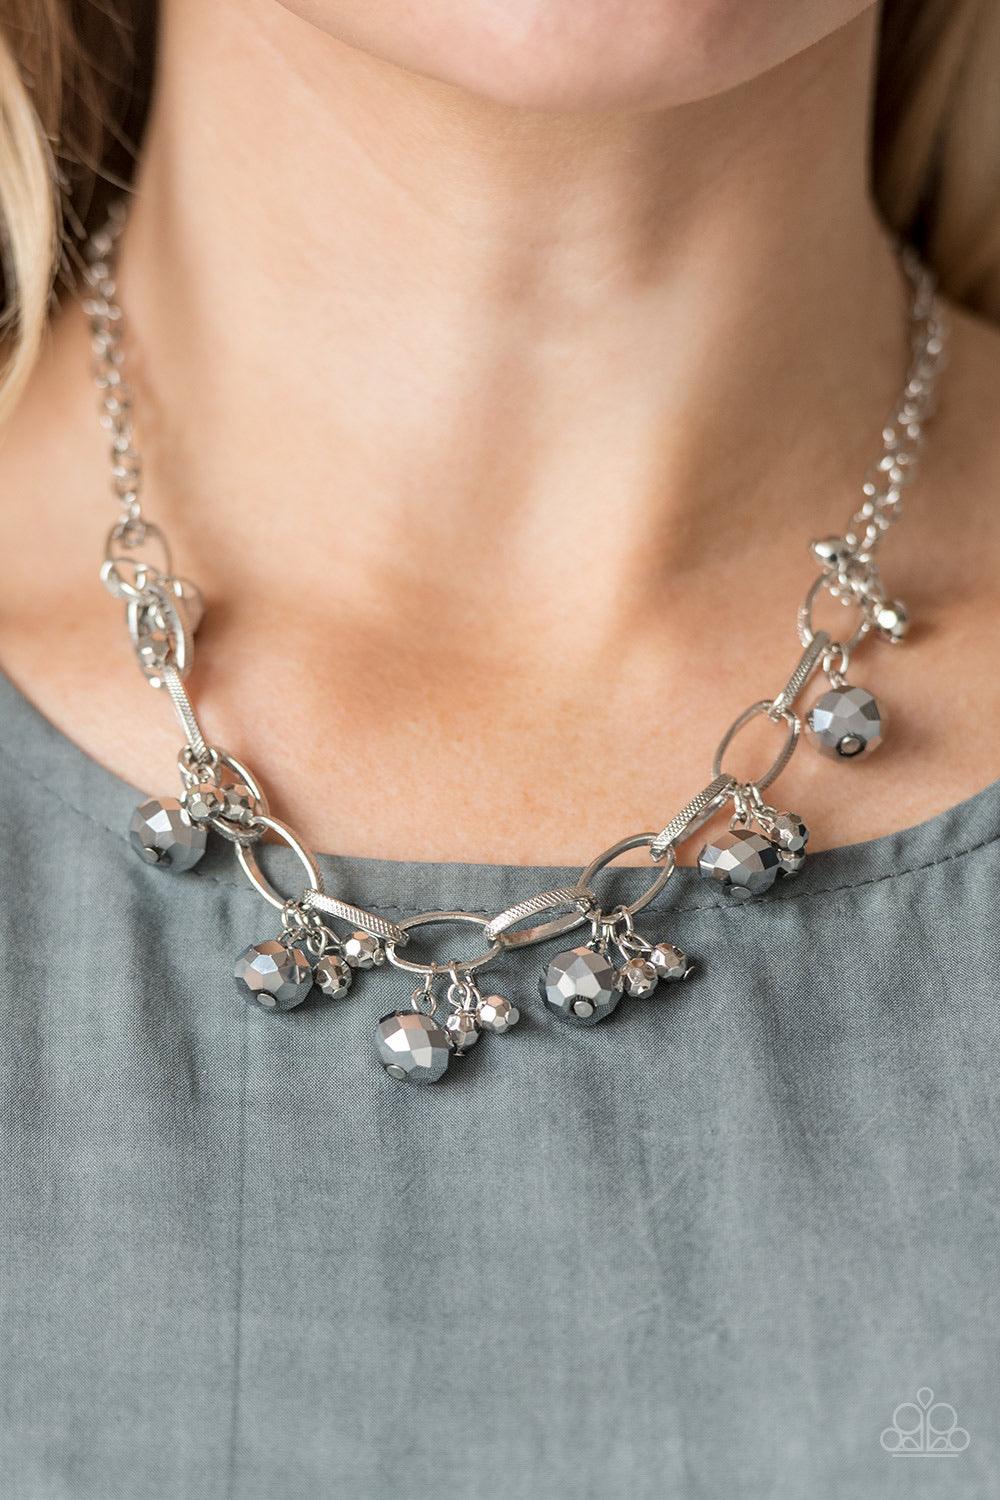 Paparazzi Accessories Let’s Get This FASHION Show On The Road - Silver Featuring a metallic shimmer, faceted hematite beads swing from the bottom of bold silver links. Clusters of faceted silver beads join the metallic gems, creating a dramatic fringe bel